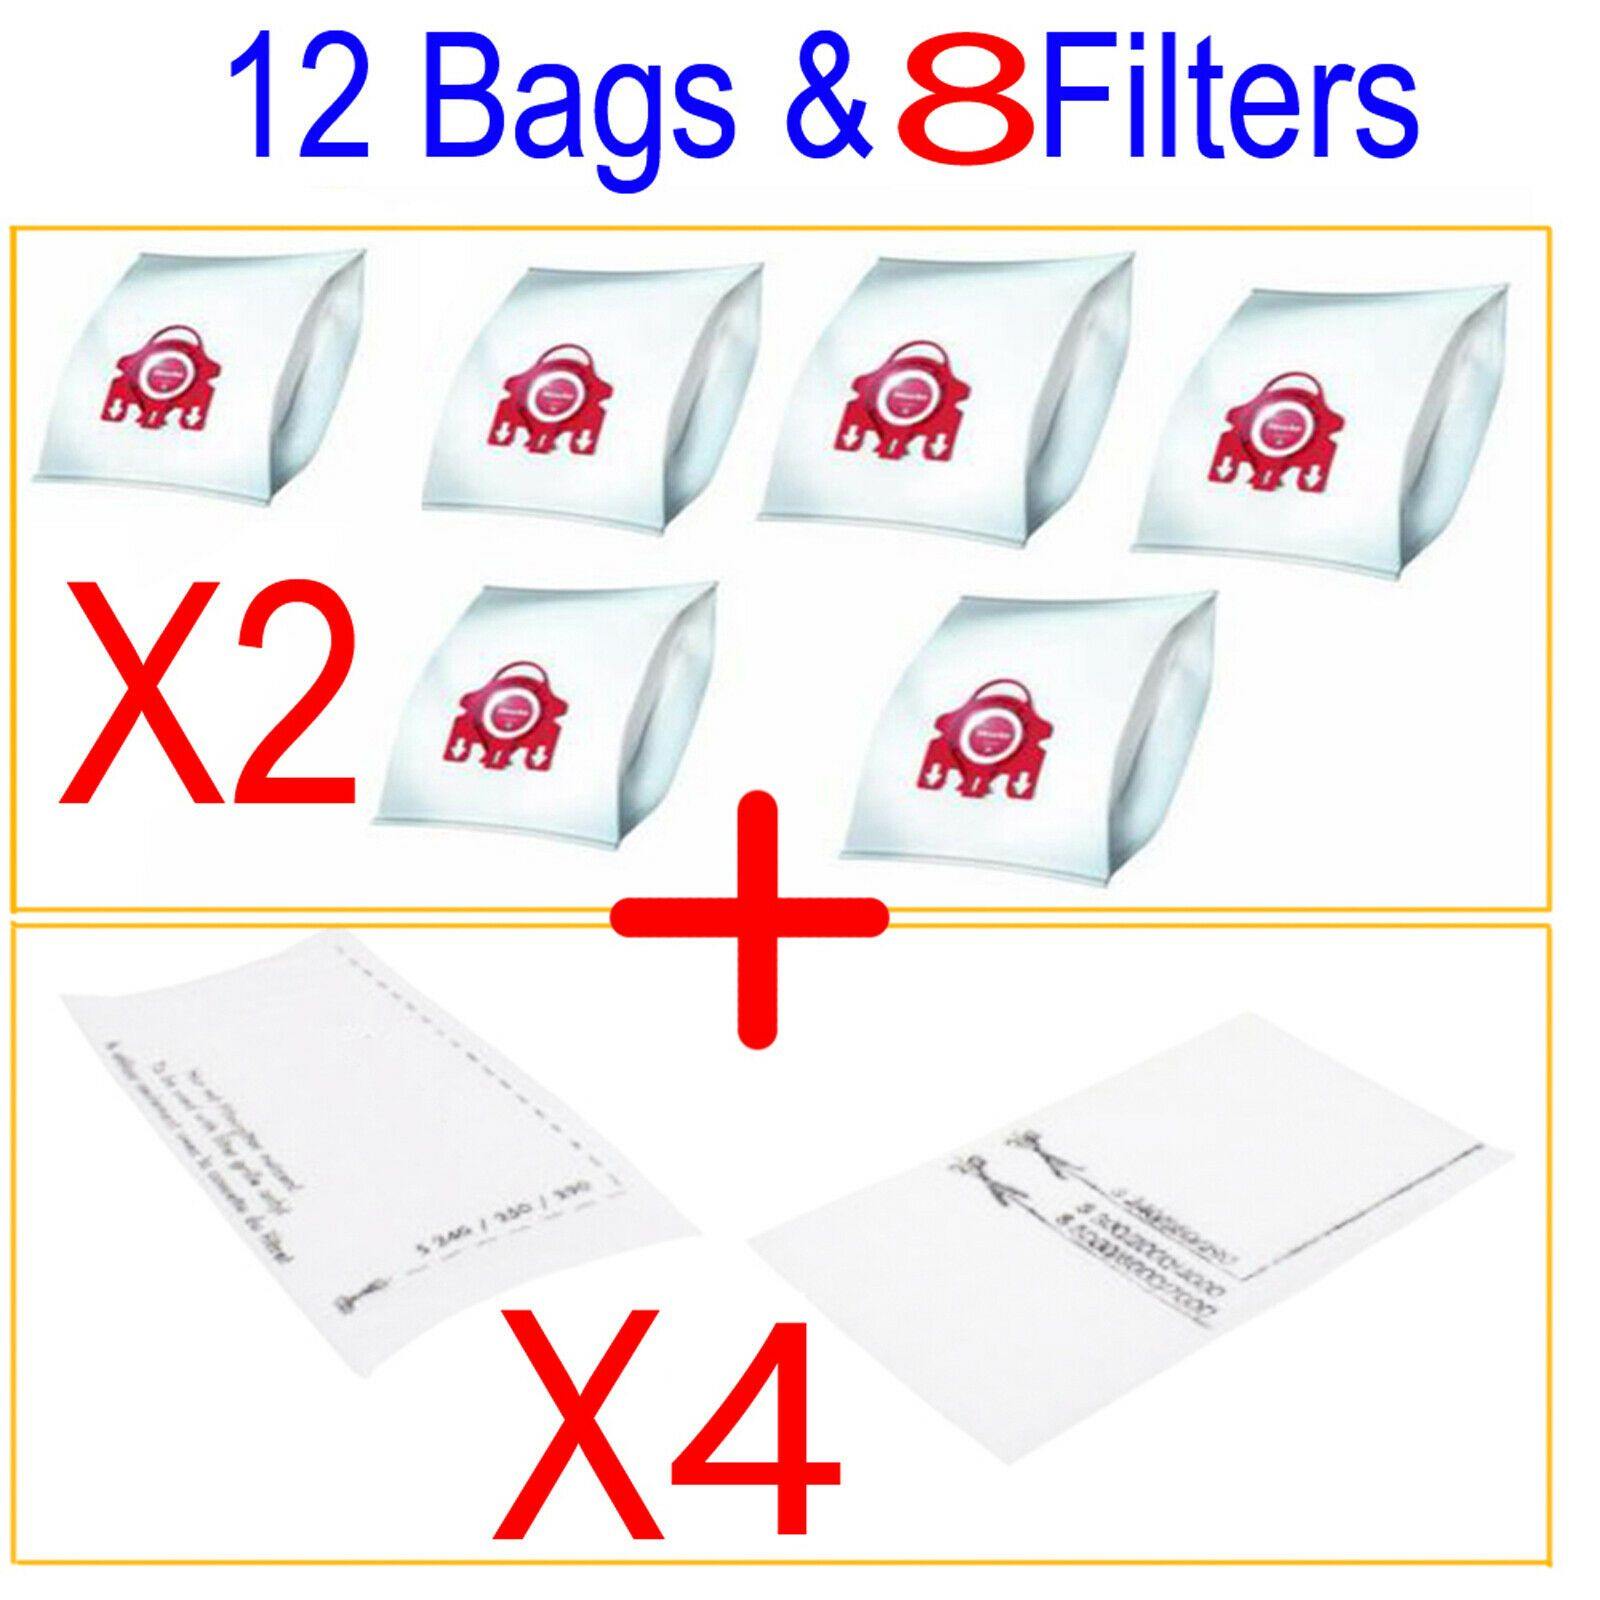 12X Synthetic Bags & 8 Filters For Miele FJM Compact C1 C2 S241-S256i S290-S291 Sparesbarn